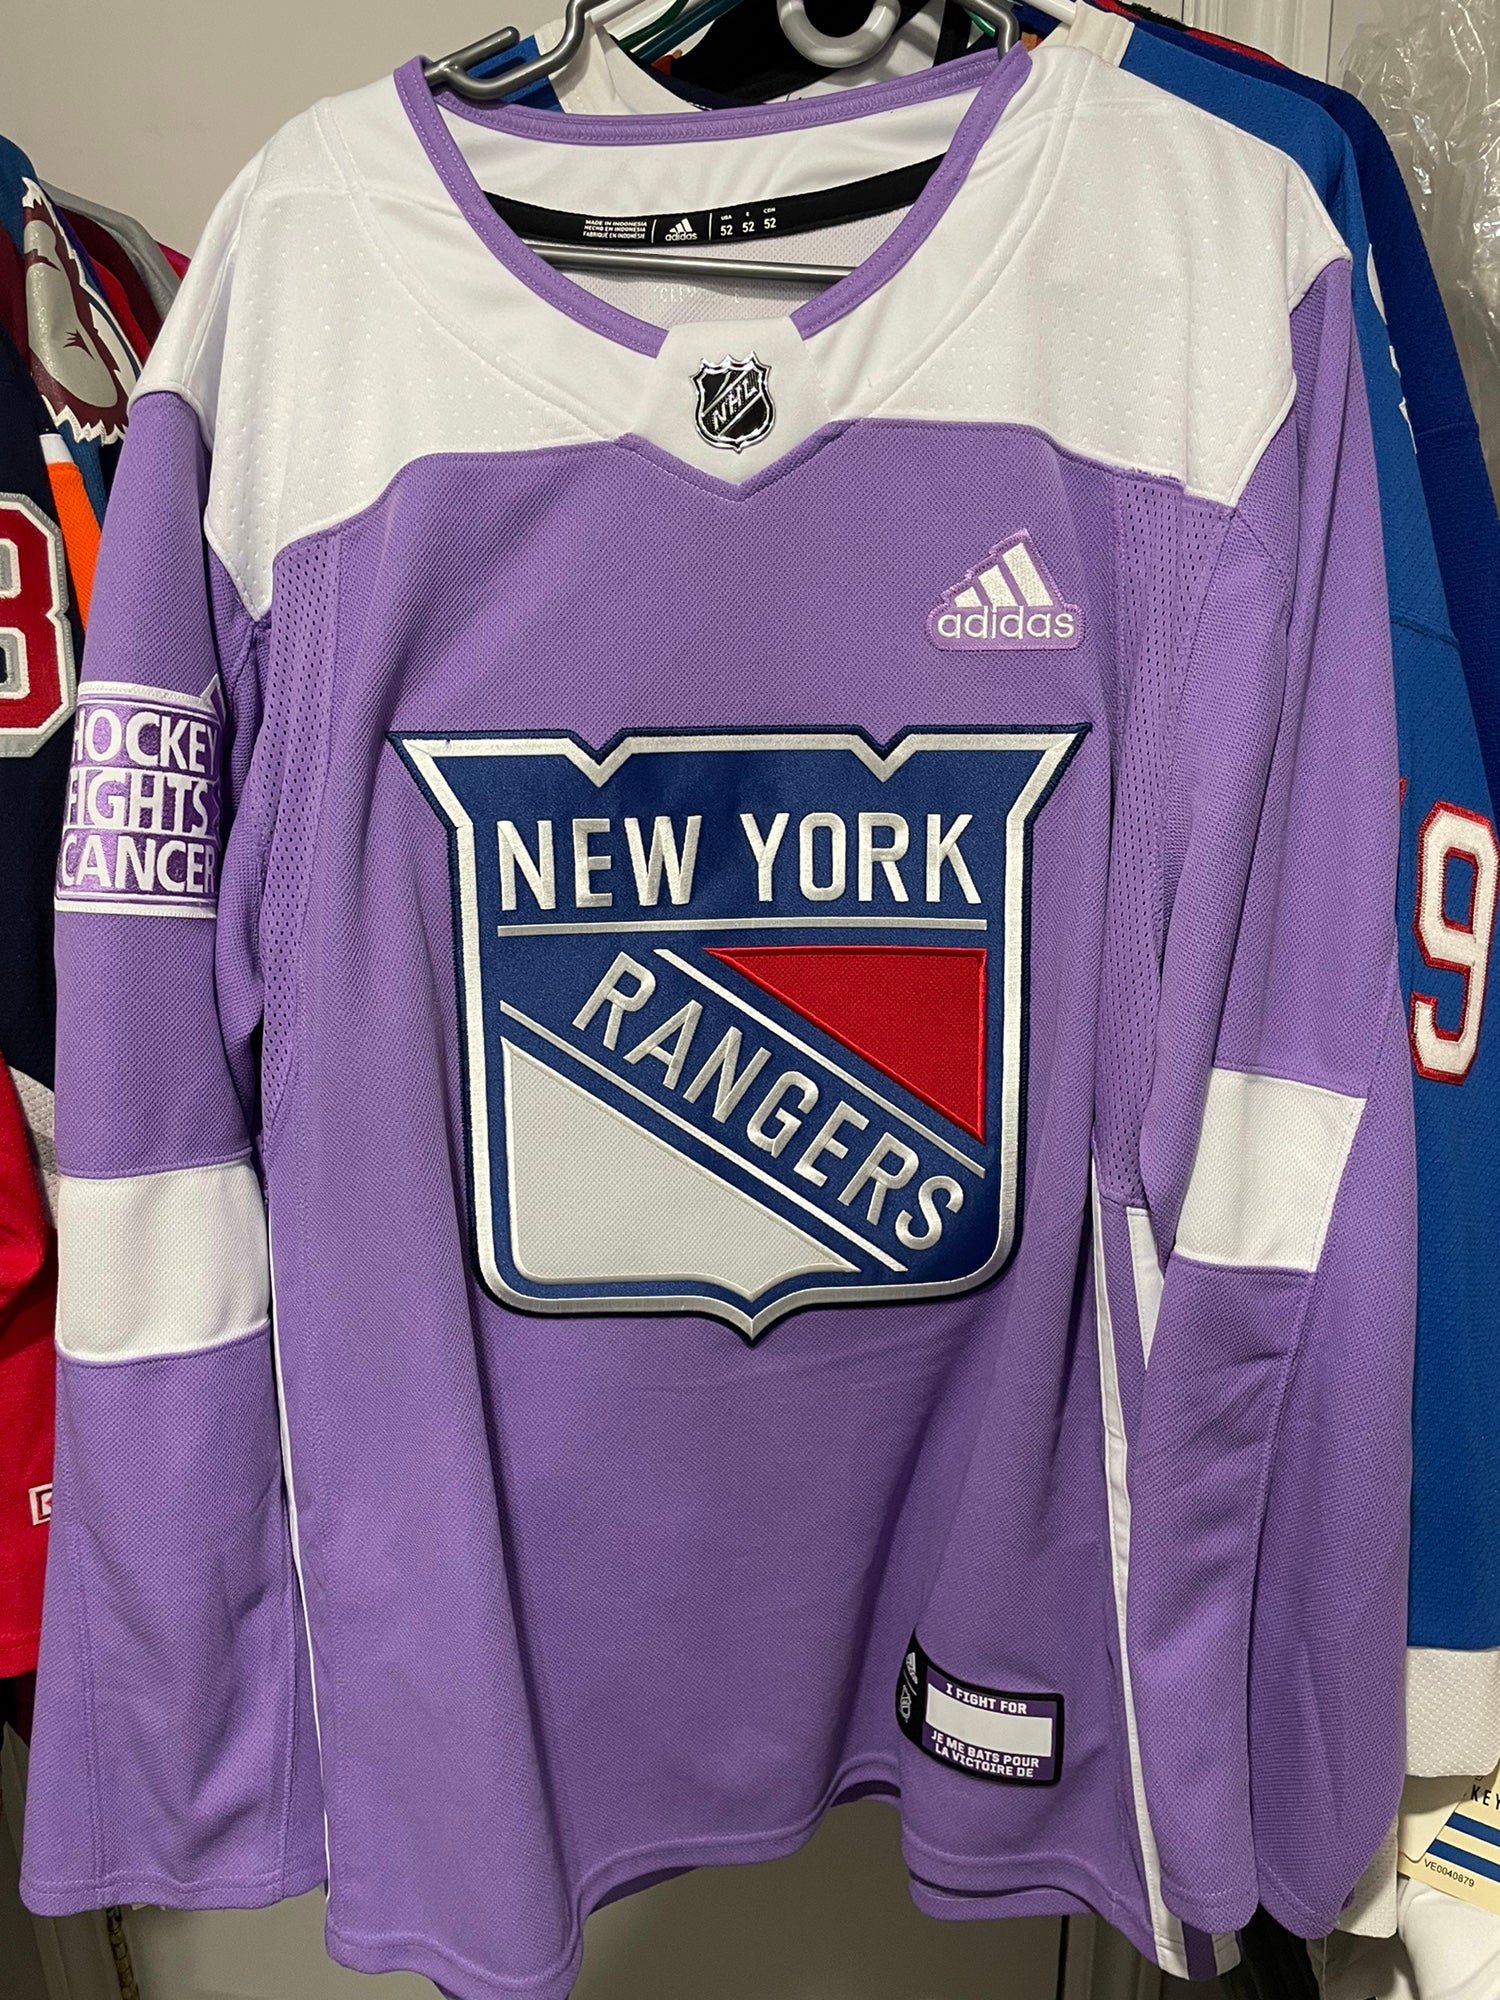 New York Rangers Adidas NHL Men's Climalite Authentic Practice Jersey